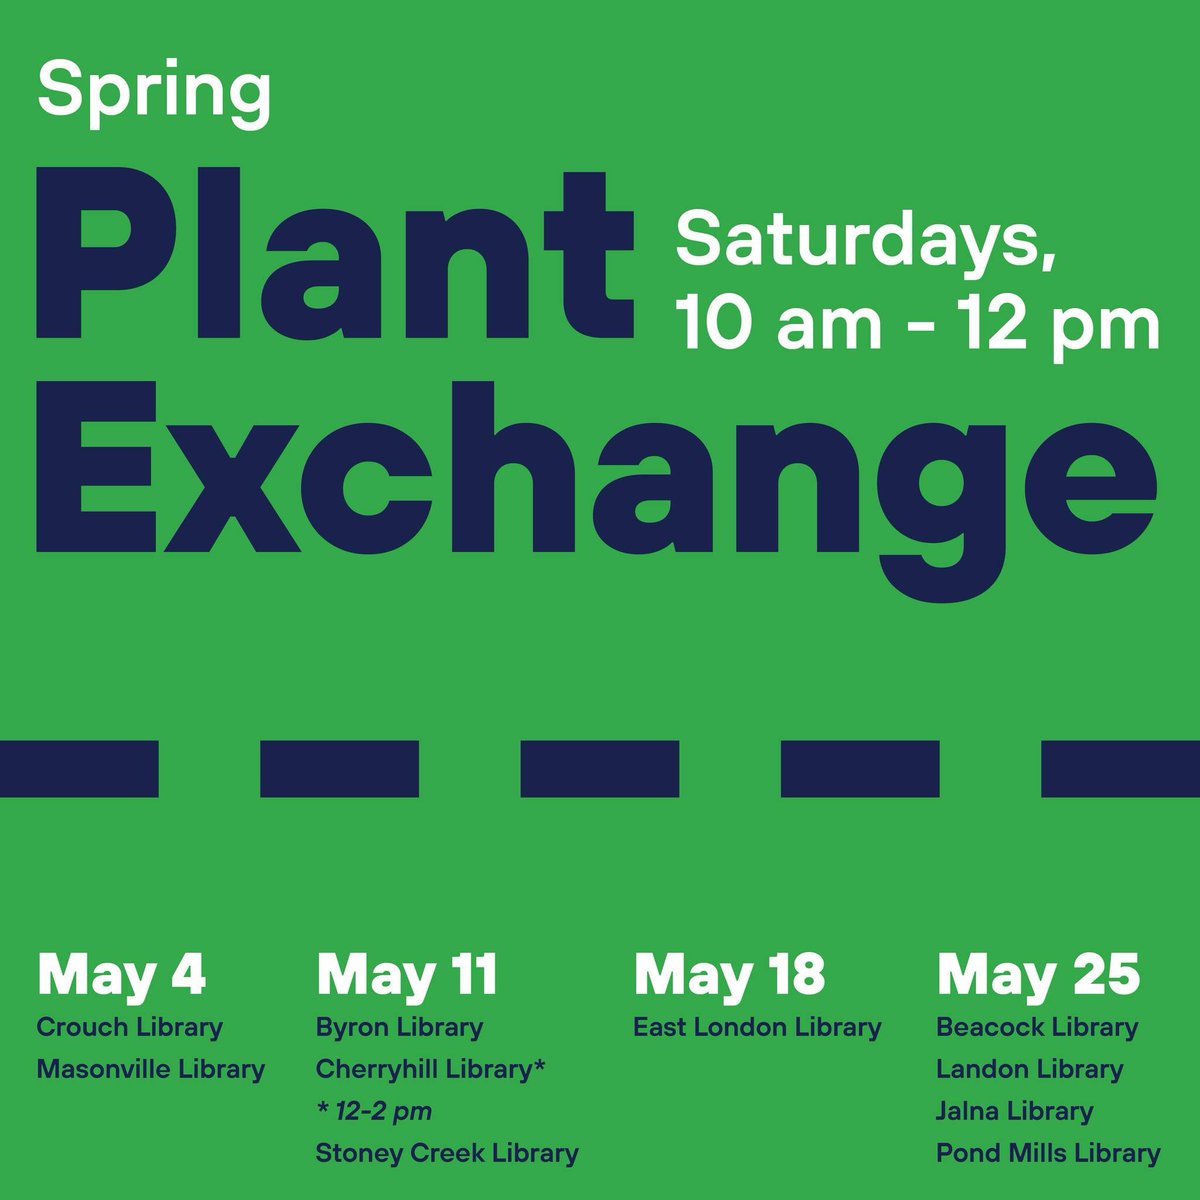 🌸🌱 Tomorrow! Rain or shine. Bring your labelled plants to Crouch and Masonville Branches on May 4 from 10am-noon to exchange with others. New gardeners welcome, too!